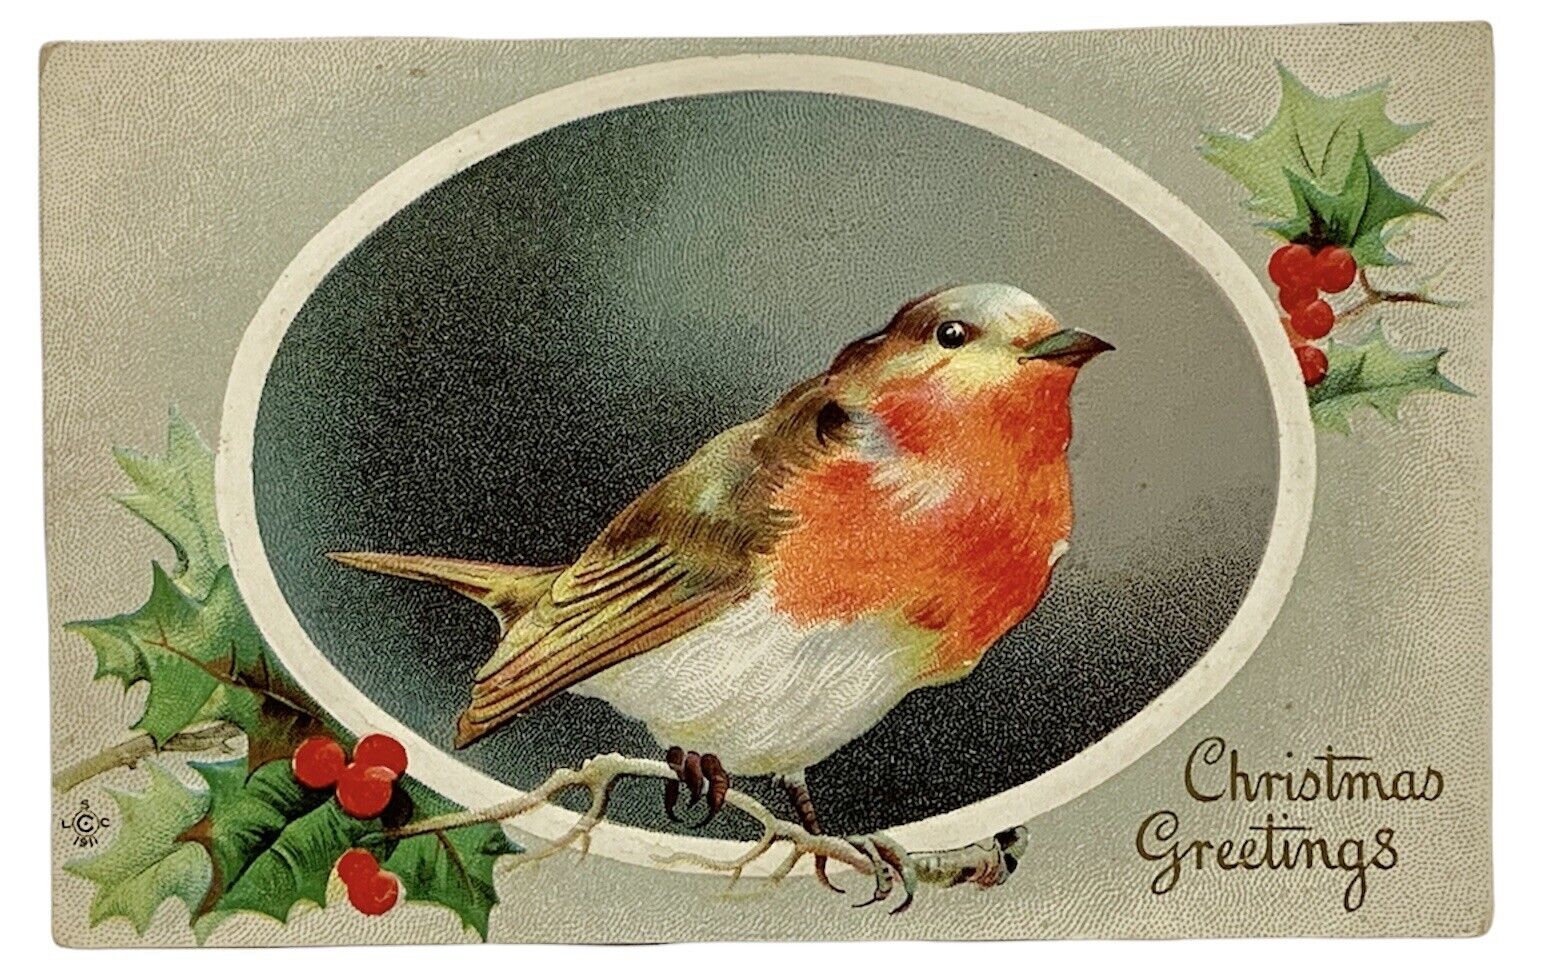 Embossed Vintage Christmas Postcard With A Bird Featured In the Center